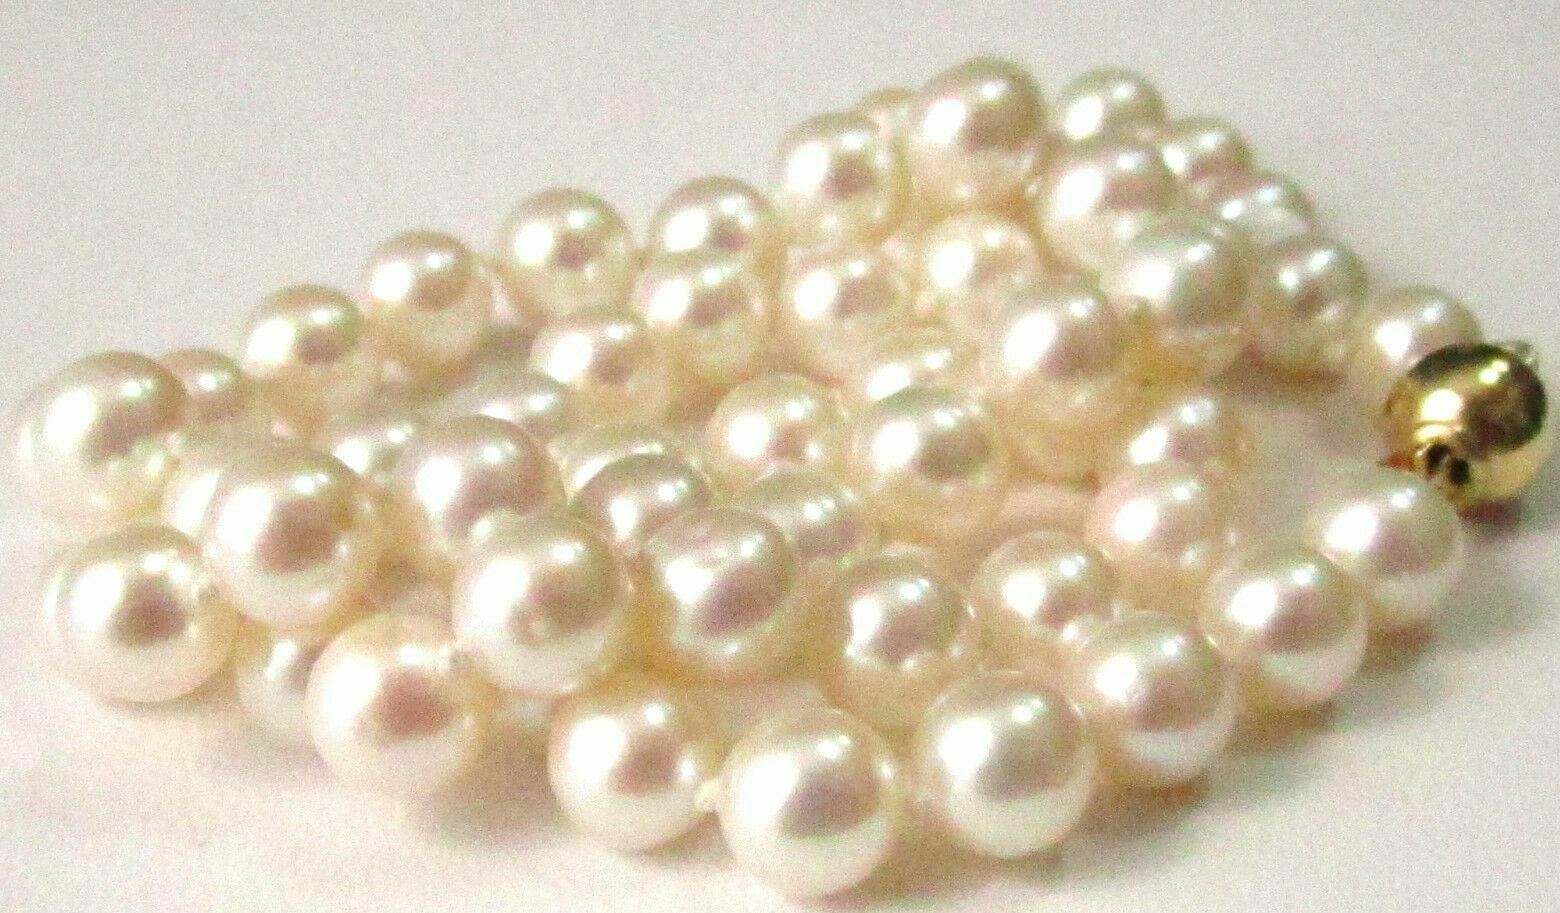 Fine 18 Inch Freshwater String Pearl Necklace 7mm each 14k Yellow Gold 57 total